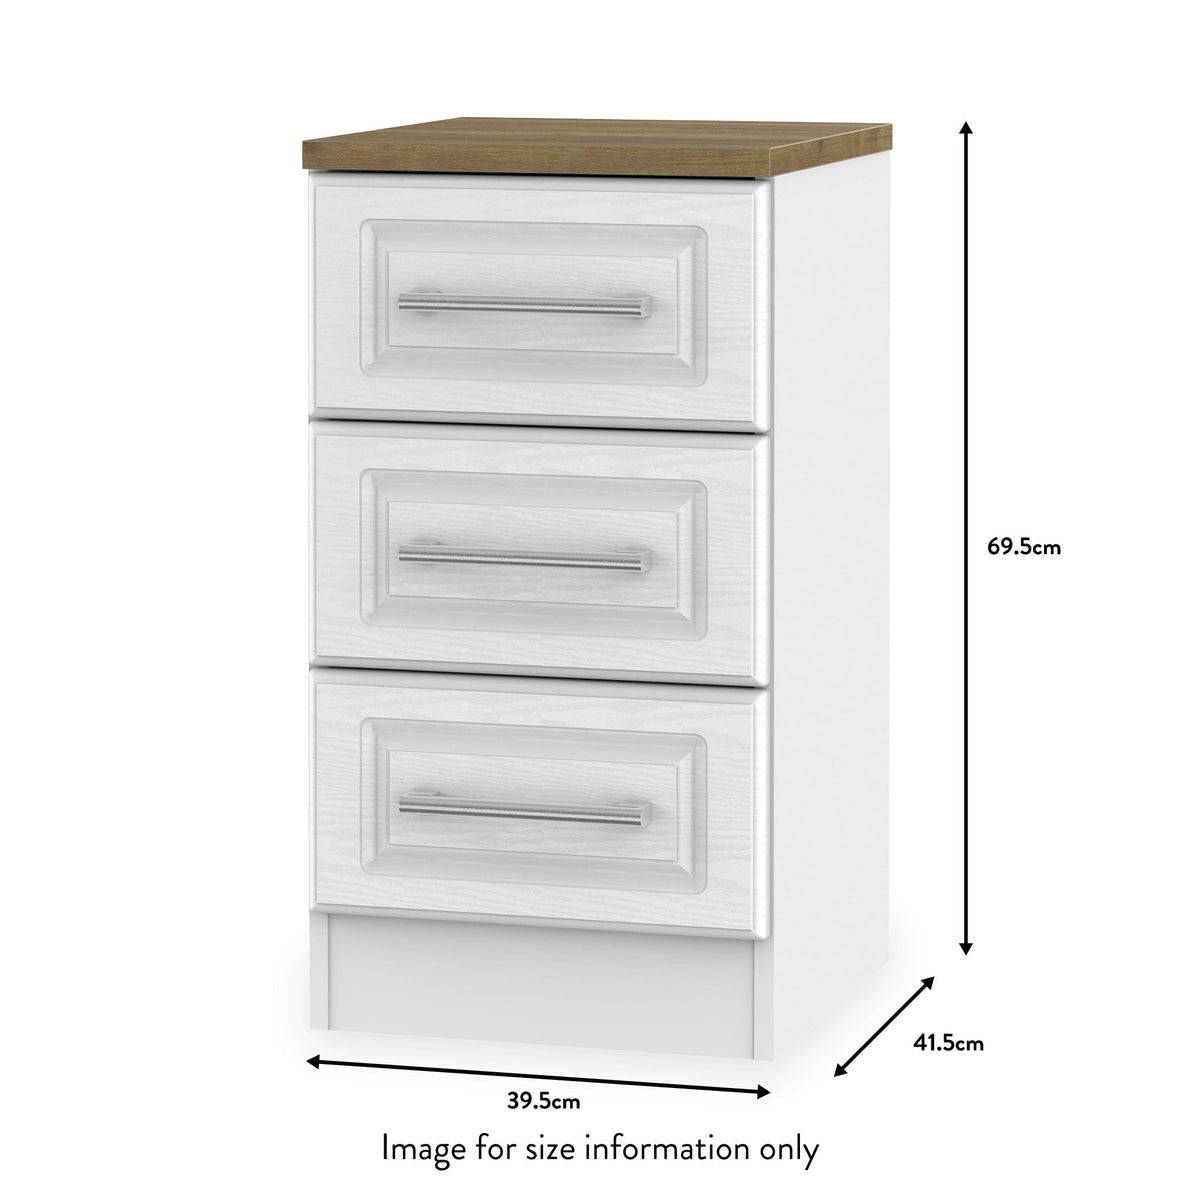 Talland White 3 Drawer Bedside Cabinet from Roseland size